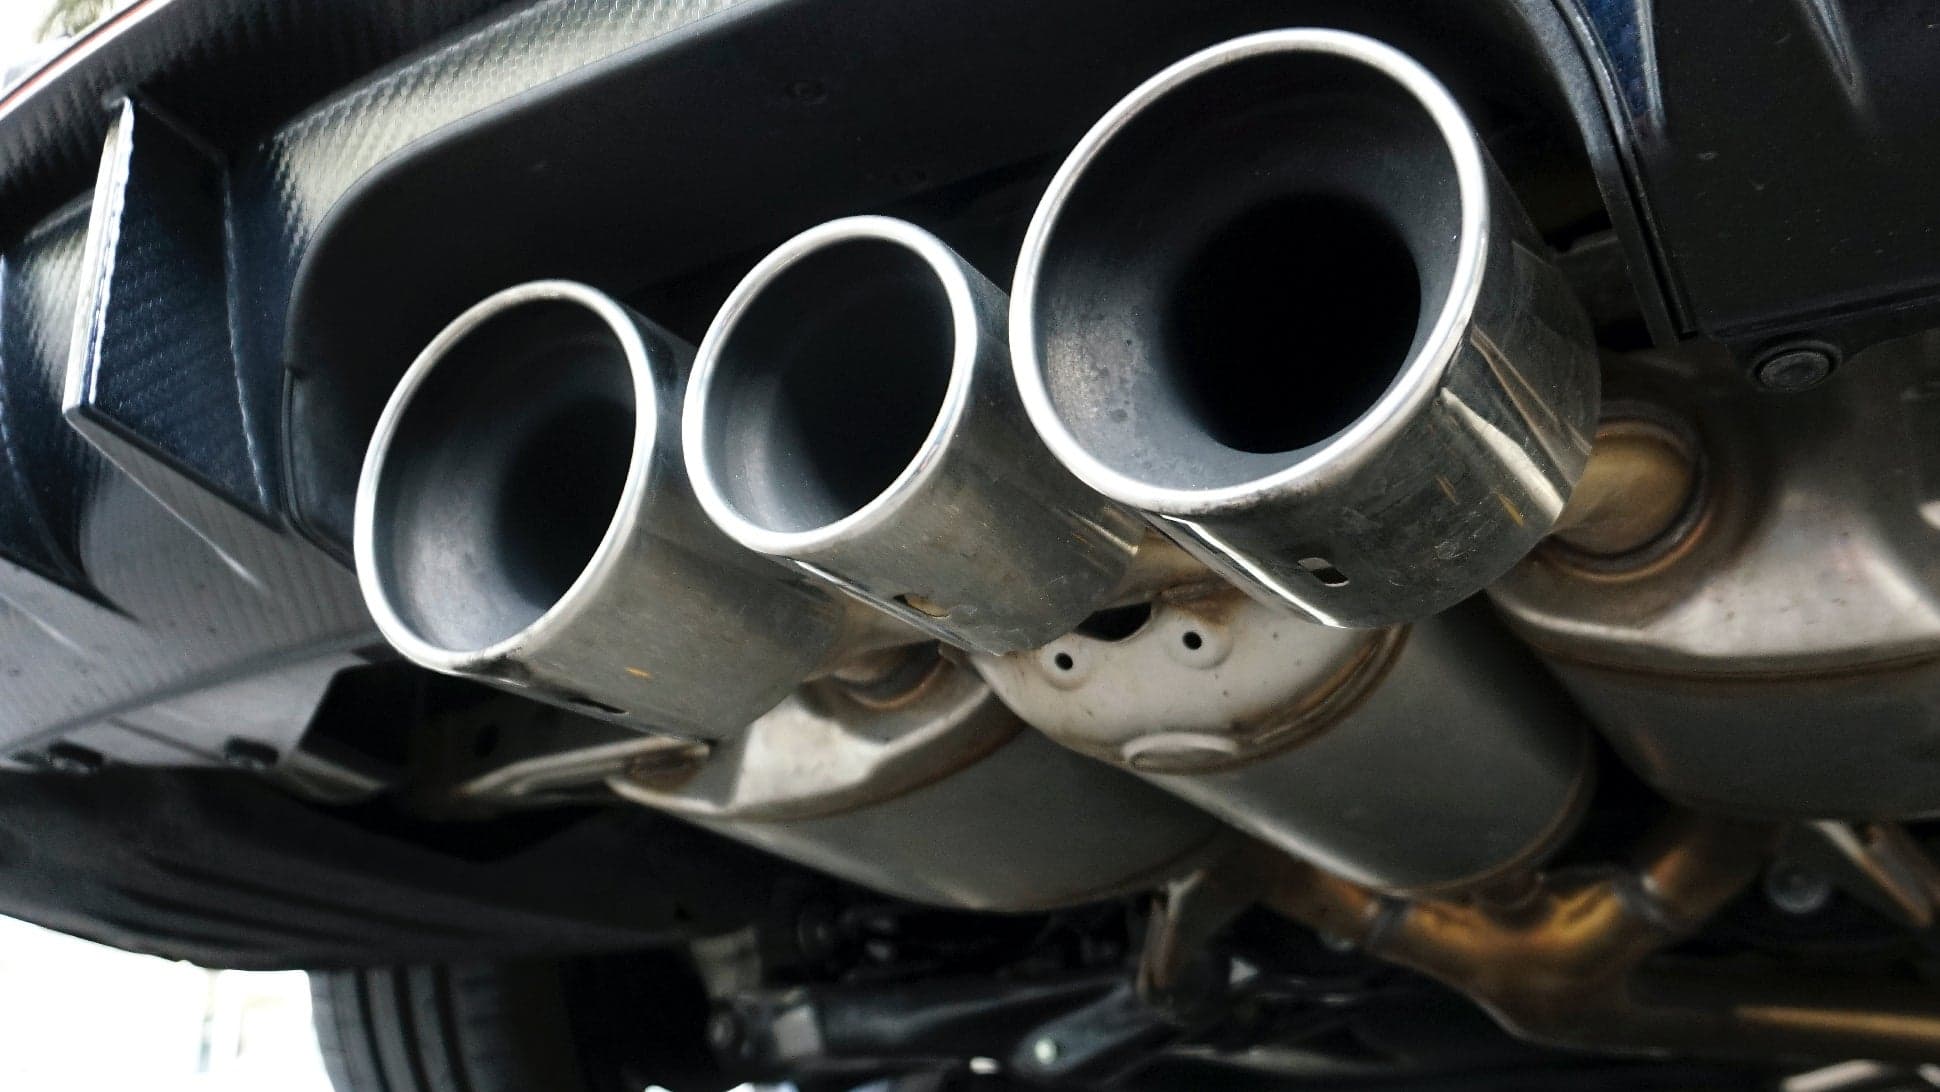 California Is So Tired of Your Car’s Loud Fartcan Exhaust They’ll Now Fine You for It